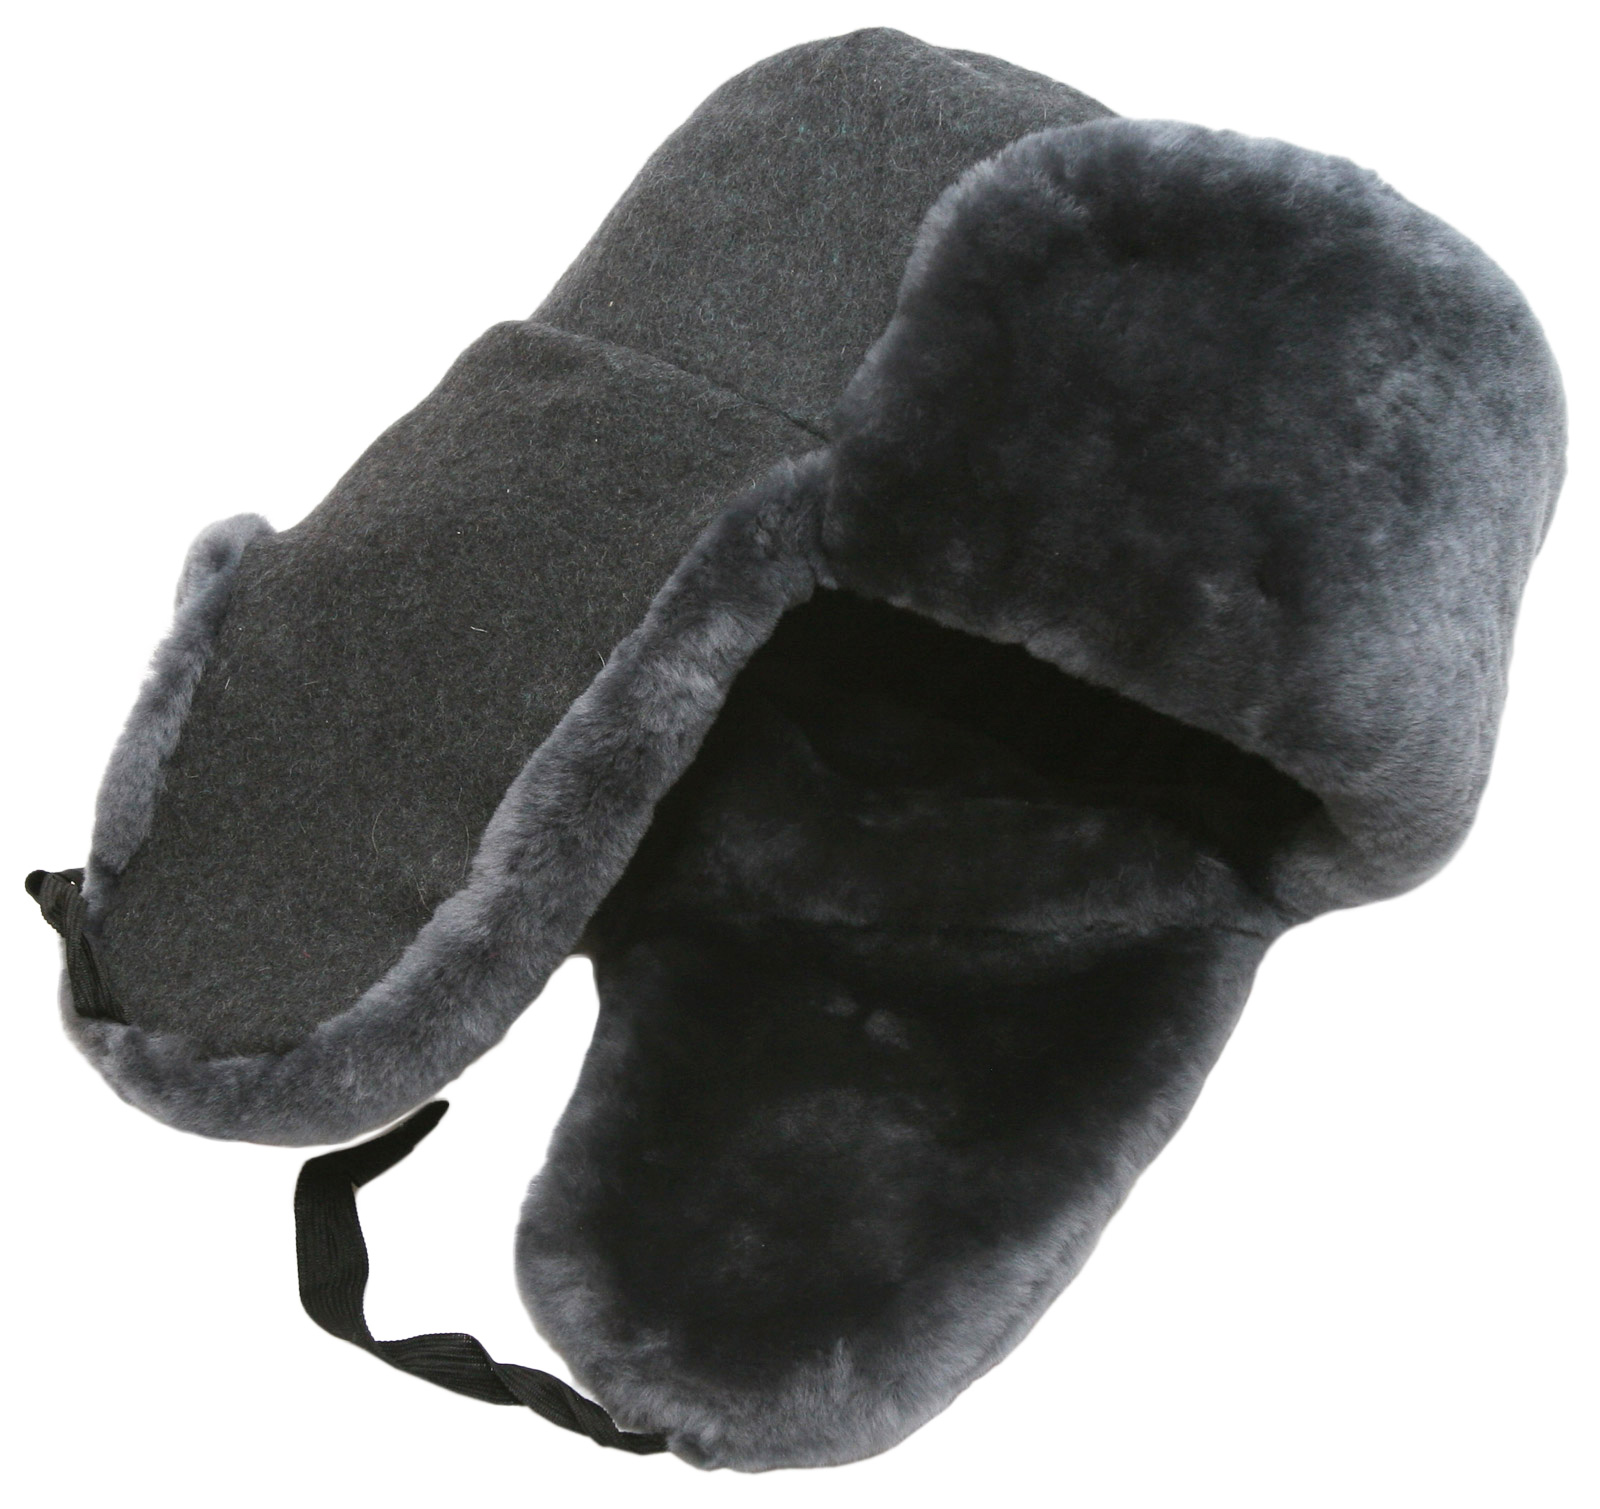 Army officer of Russian Federation mouton ushanka winter hat ...